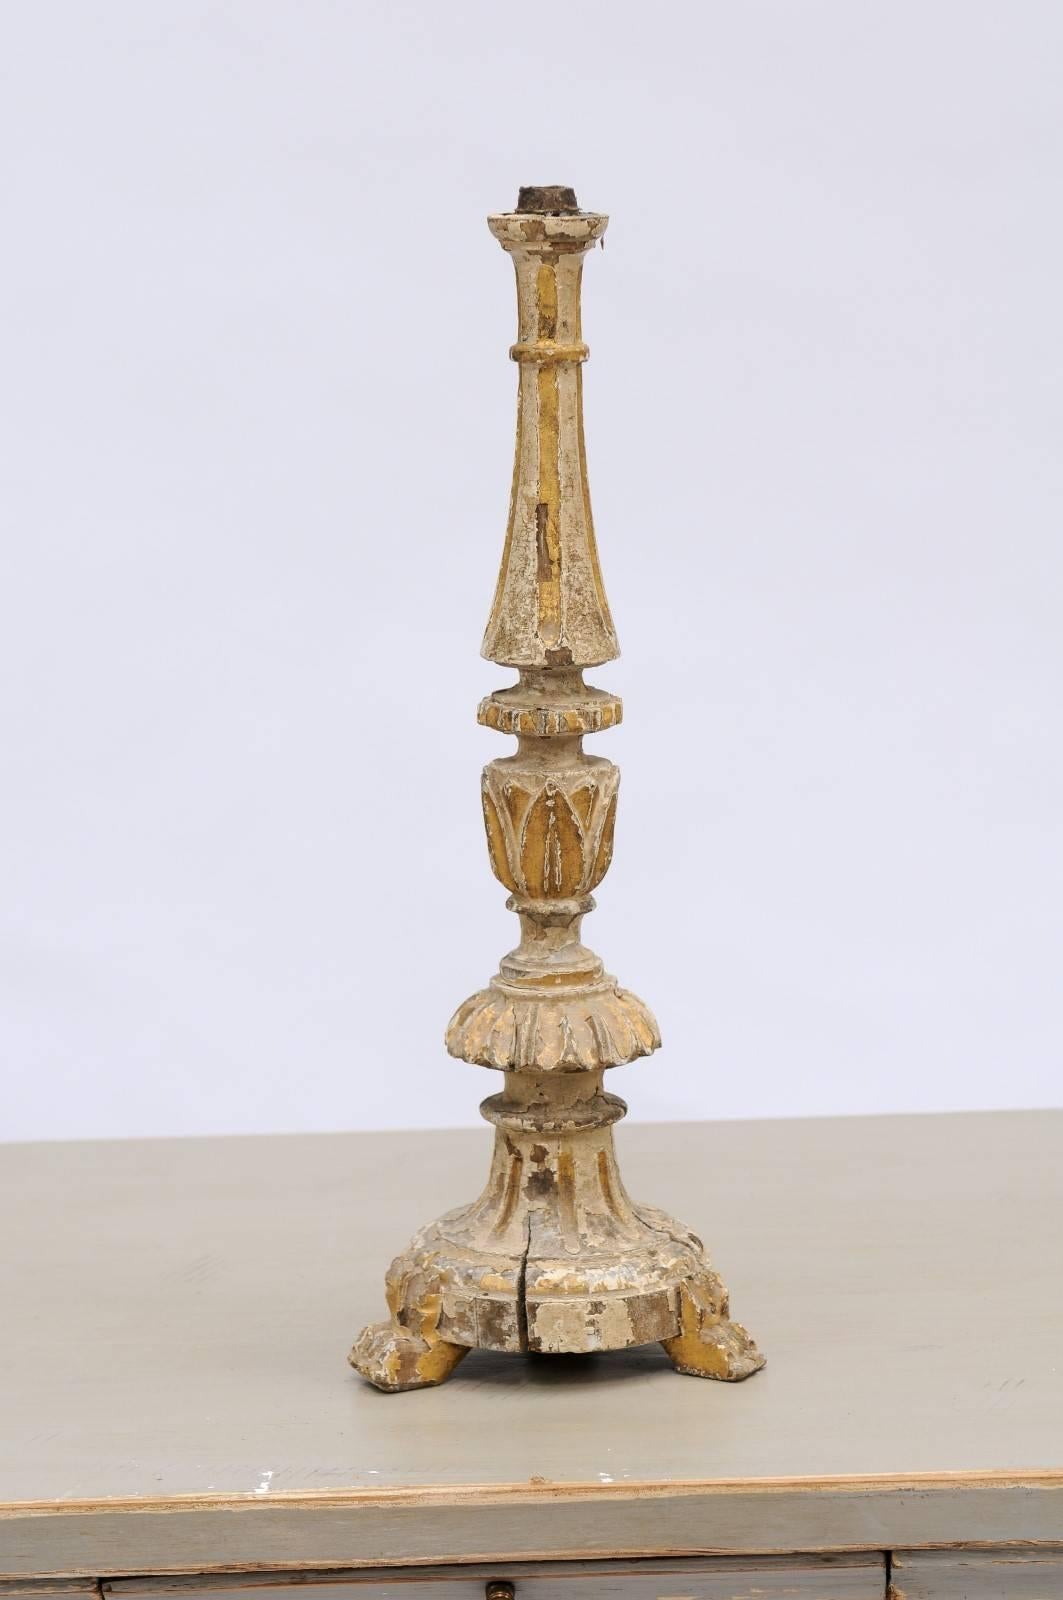 A small size 18th century painted candlestick with traces of gilding, fluted body and floral motifs from Portugal. Featuring carefully carved details, an elegant patina and three charming claw feet, this Portuguese candlestick wears its age well. A